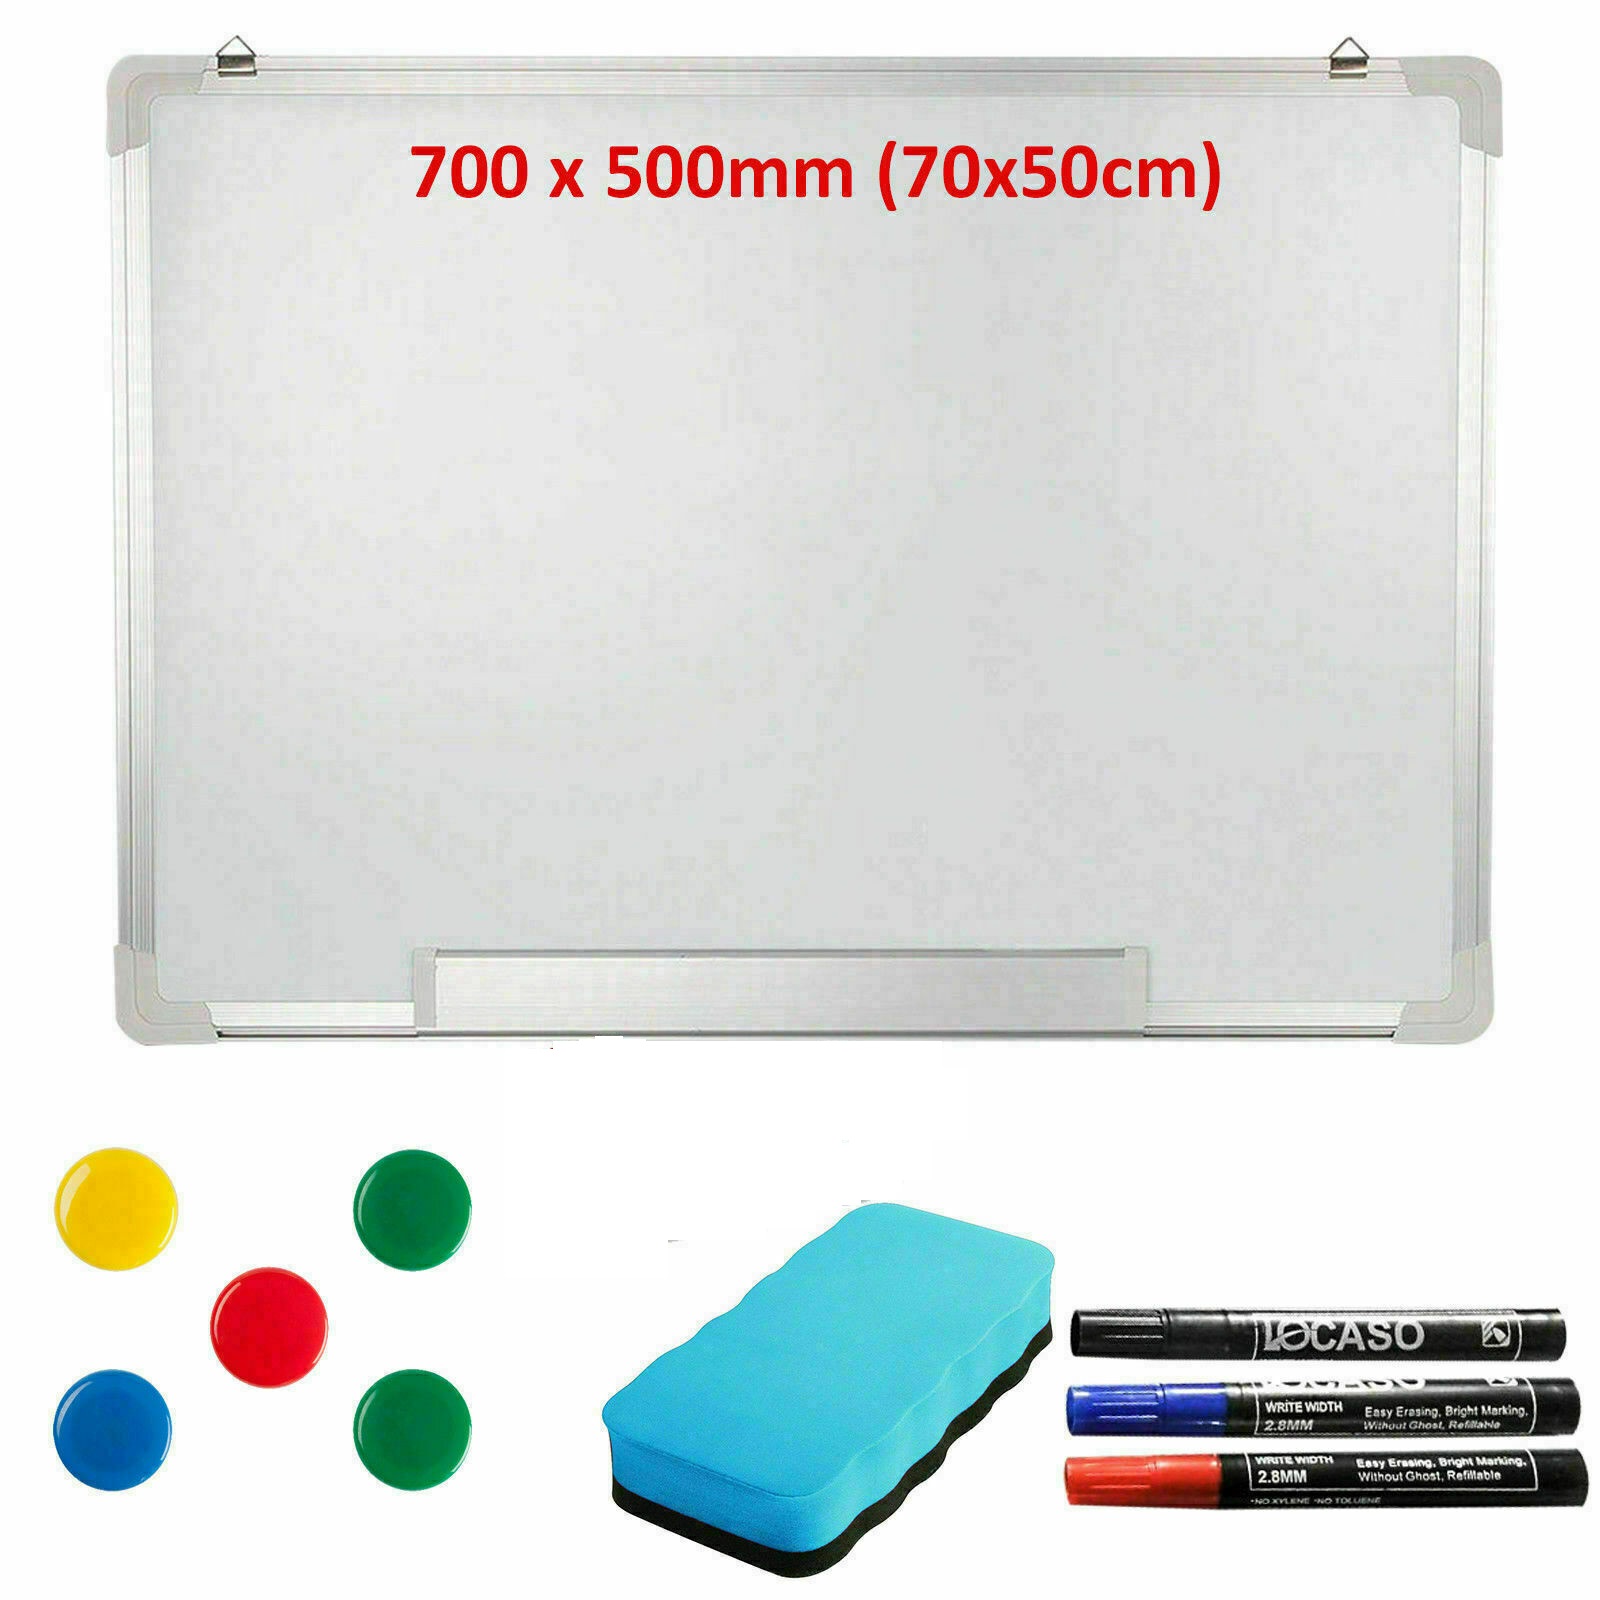 700 X 500mm Magnetic Whiteboard Small Large White Board Dry Wipe Office Home School Notice